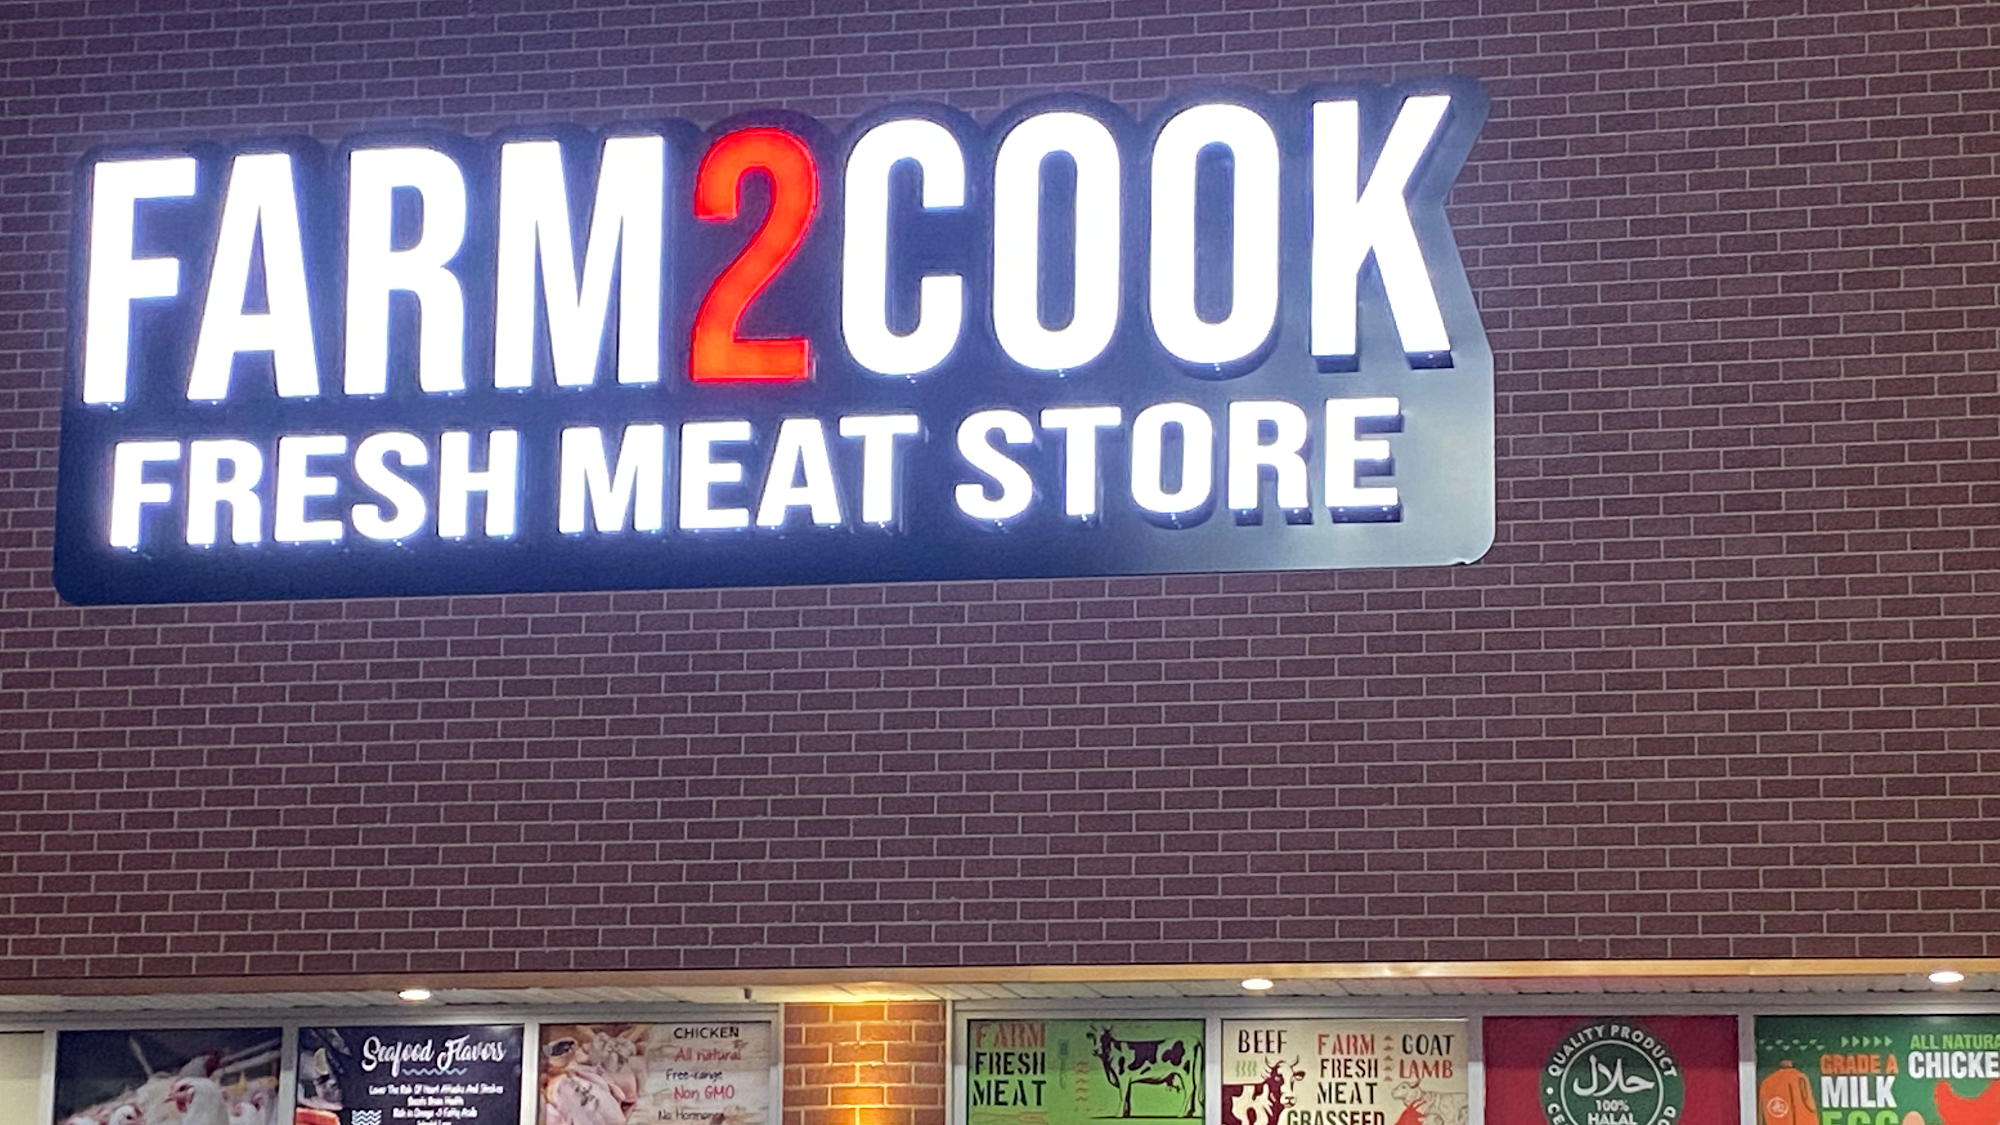 FARM2COOK FRESH MEAT STORE